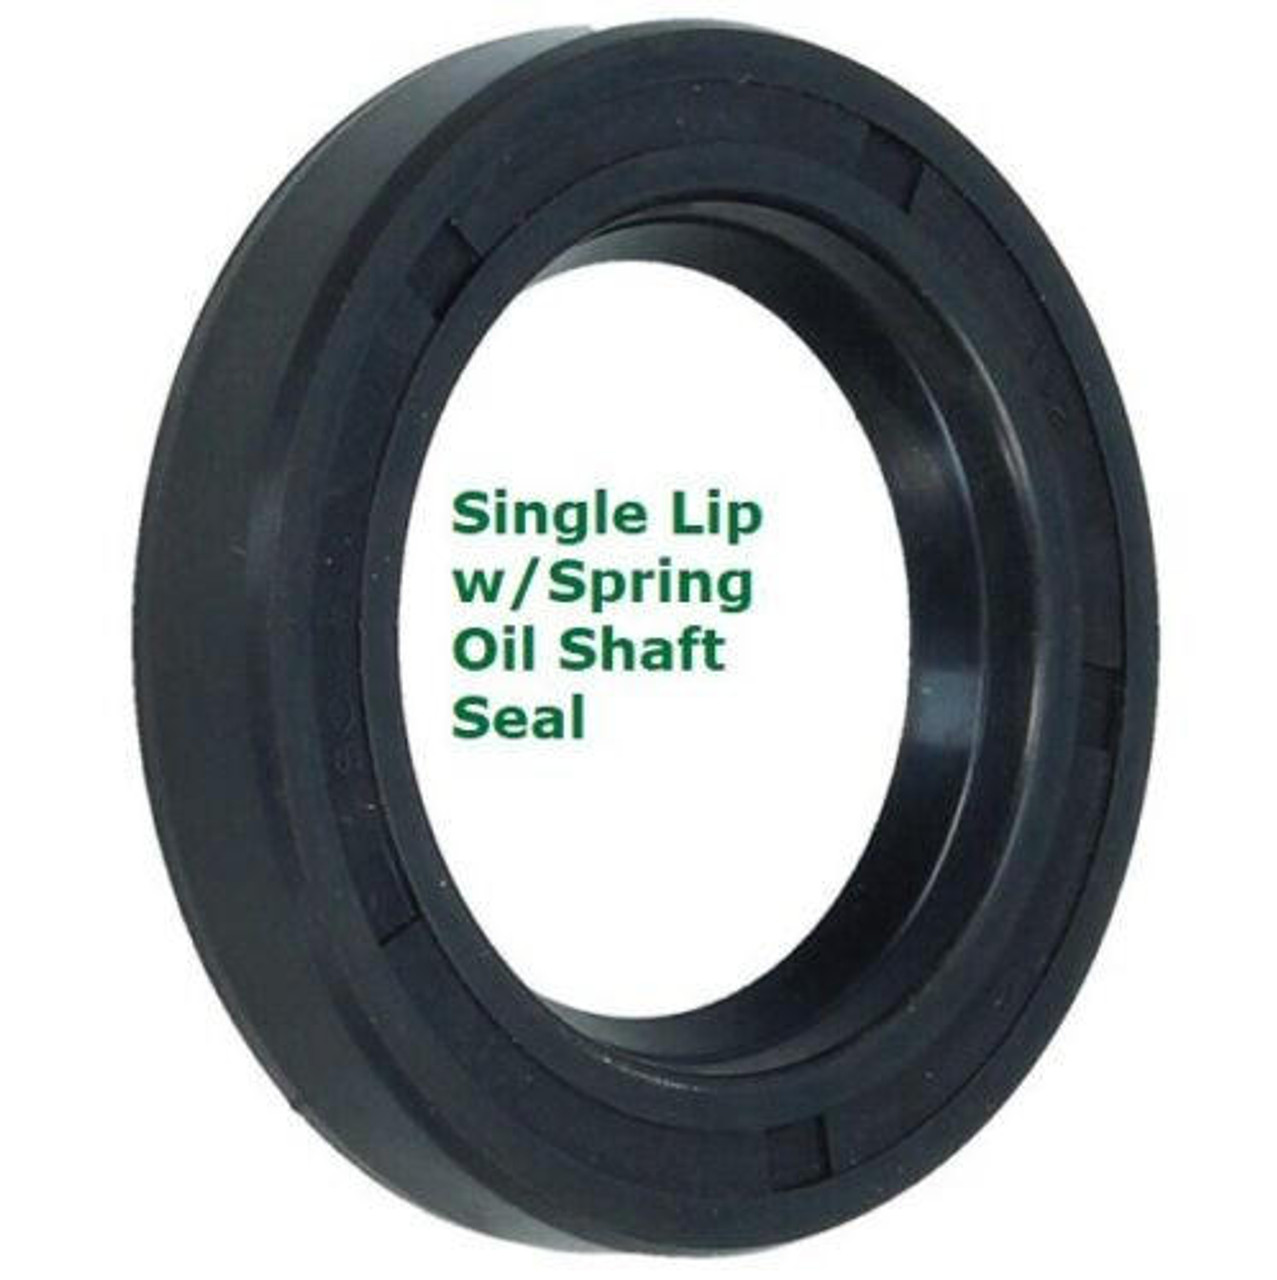 Metric Oil Shaft Seal 38 x 50 x 7mm Single Lip  Ref# CR565367 or CR692445 Price for 1 pc